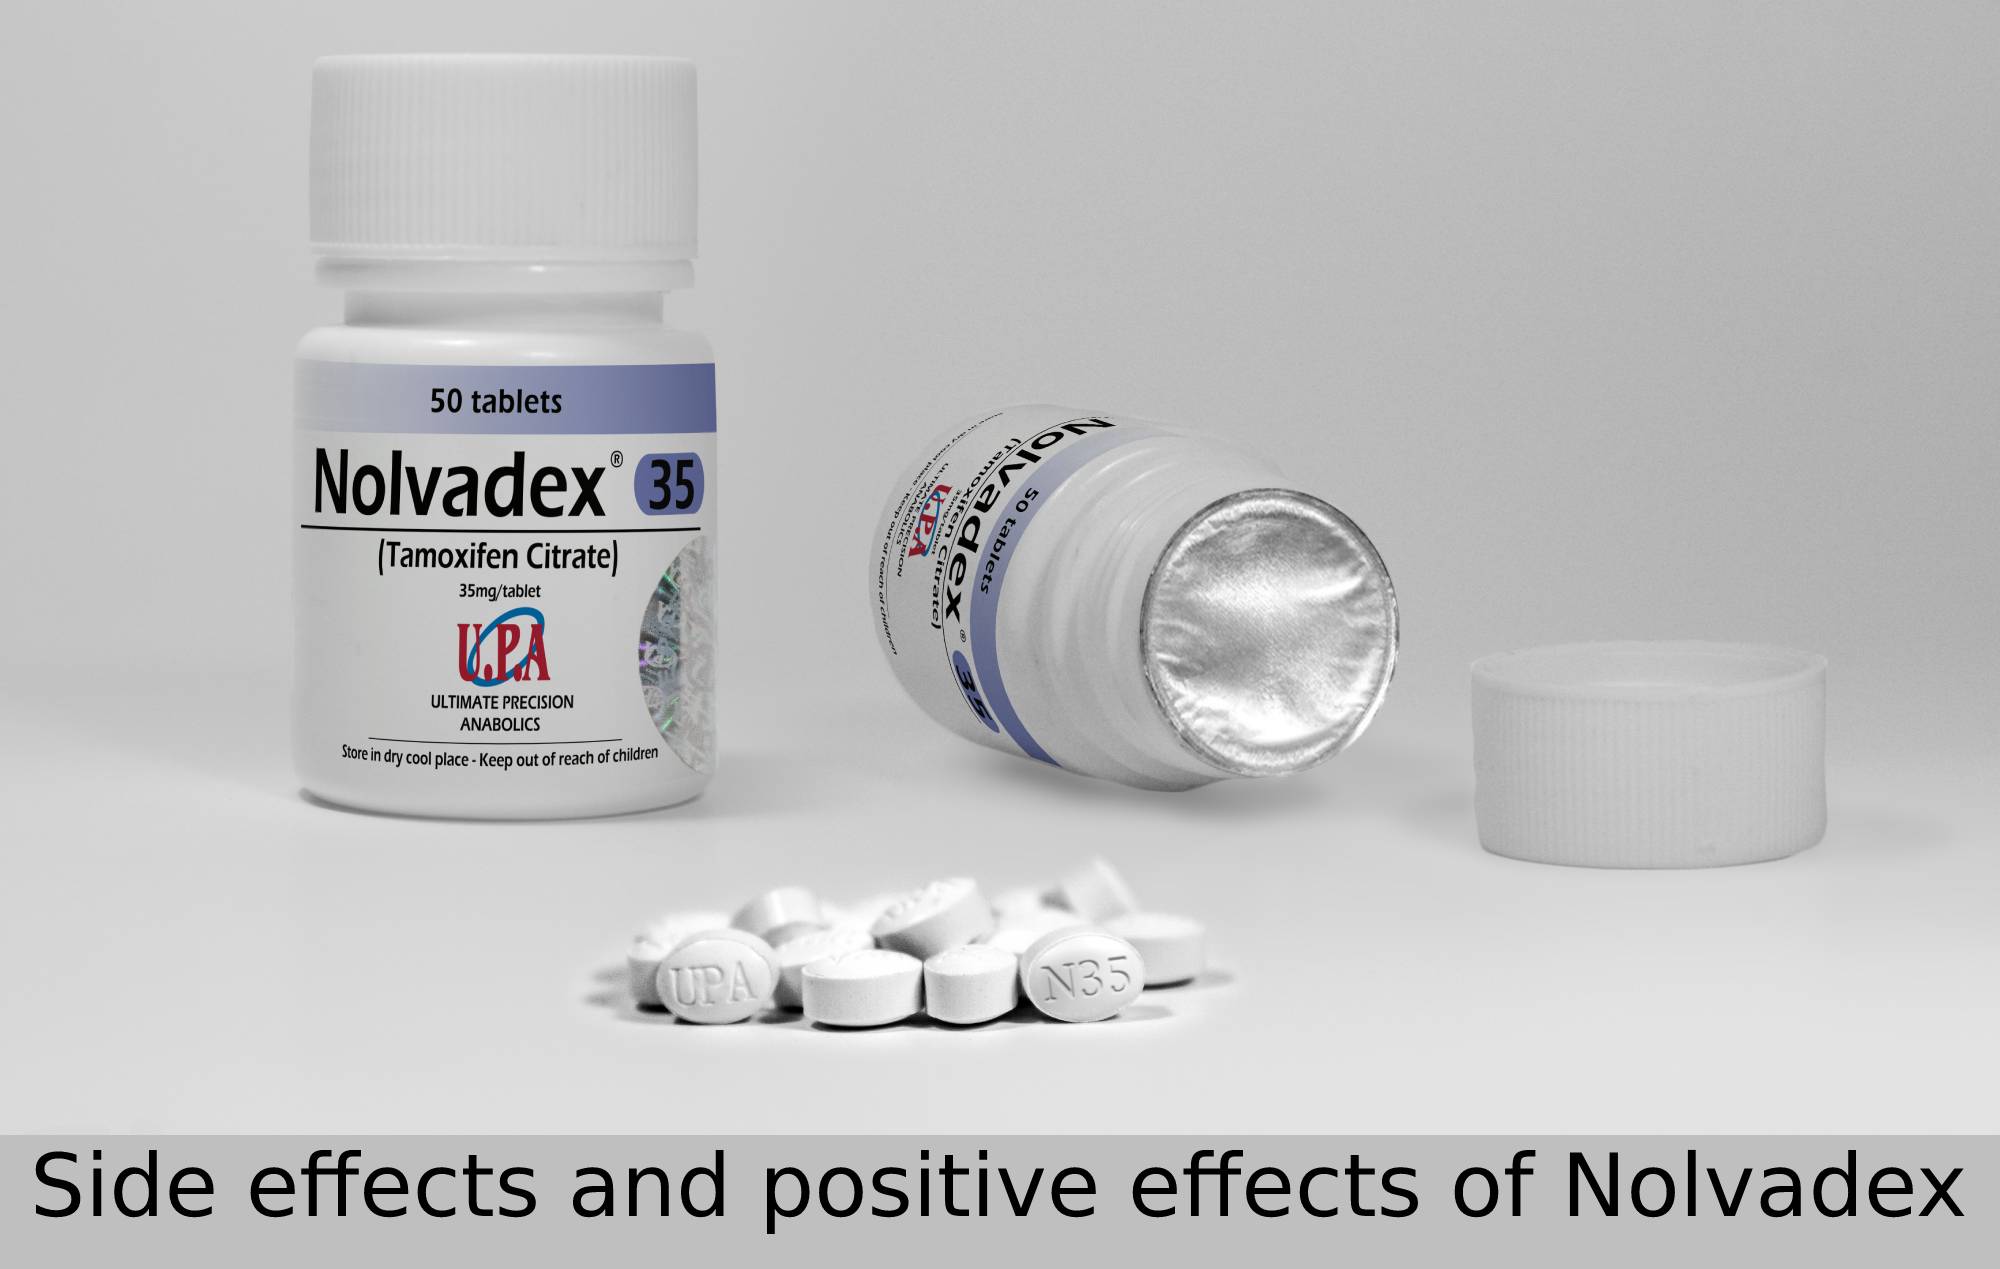 Side effects and positive effects of Nolvadex